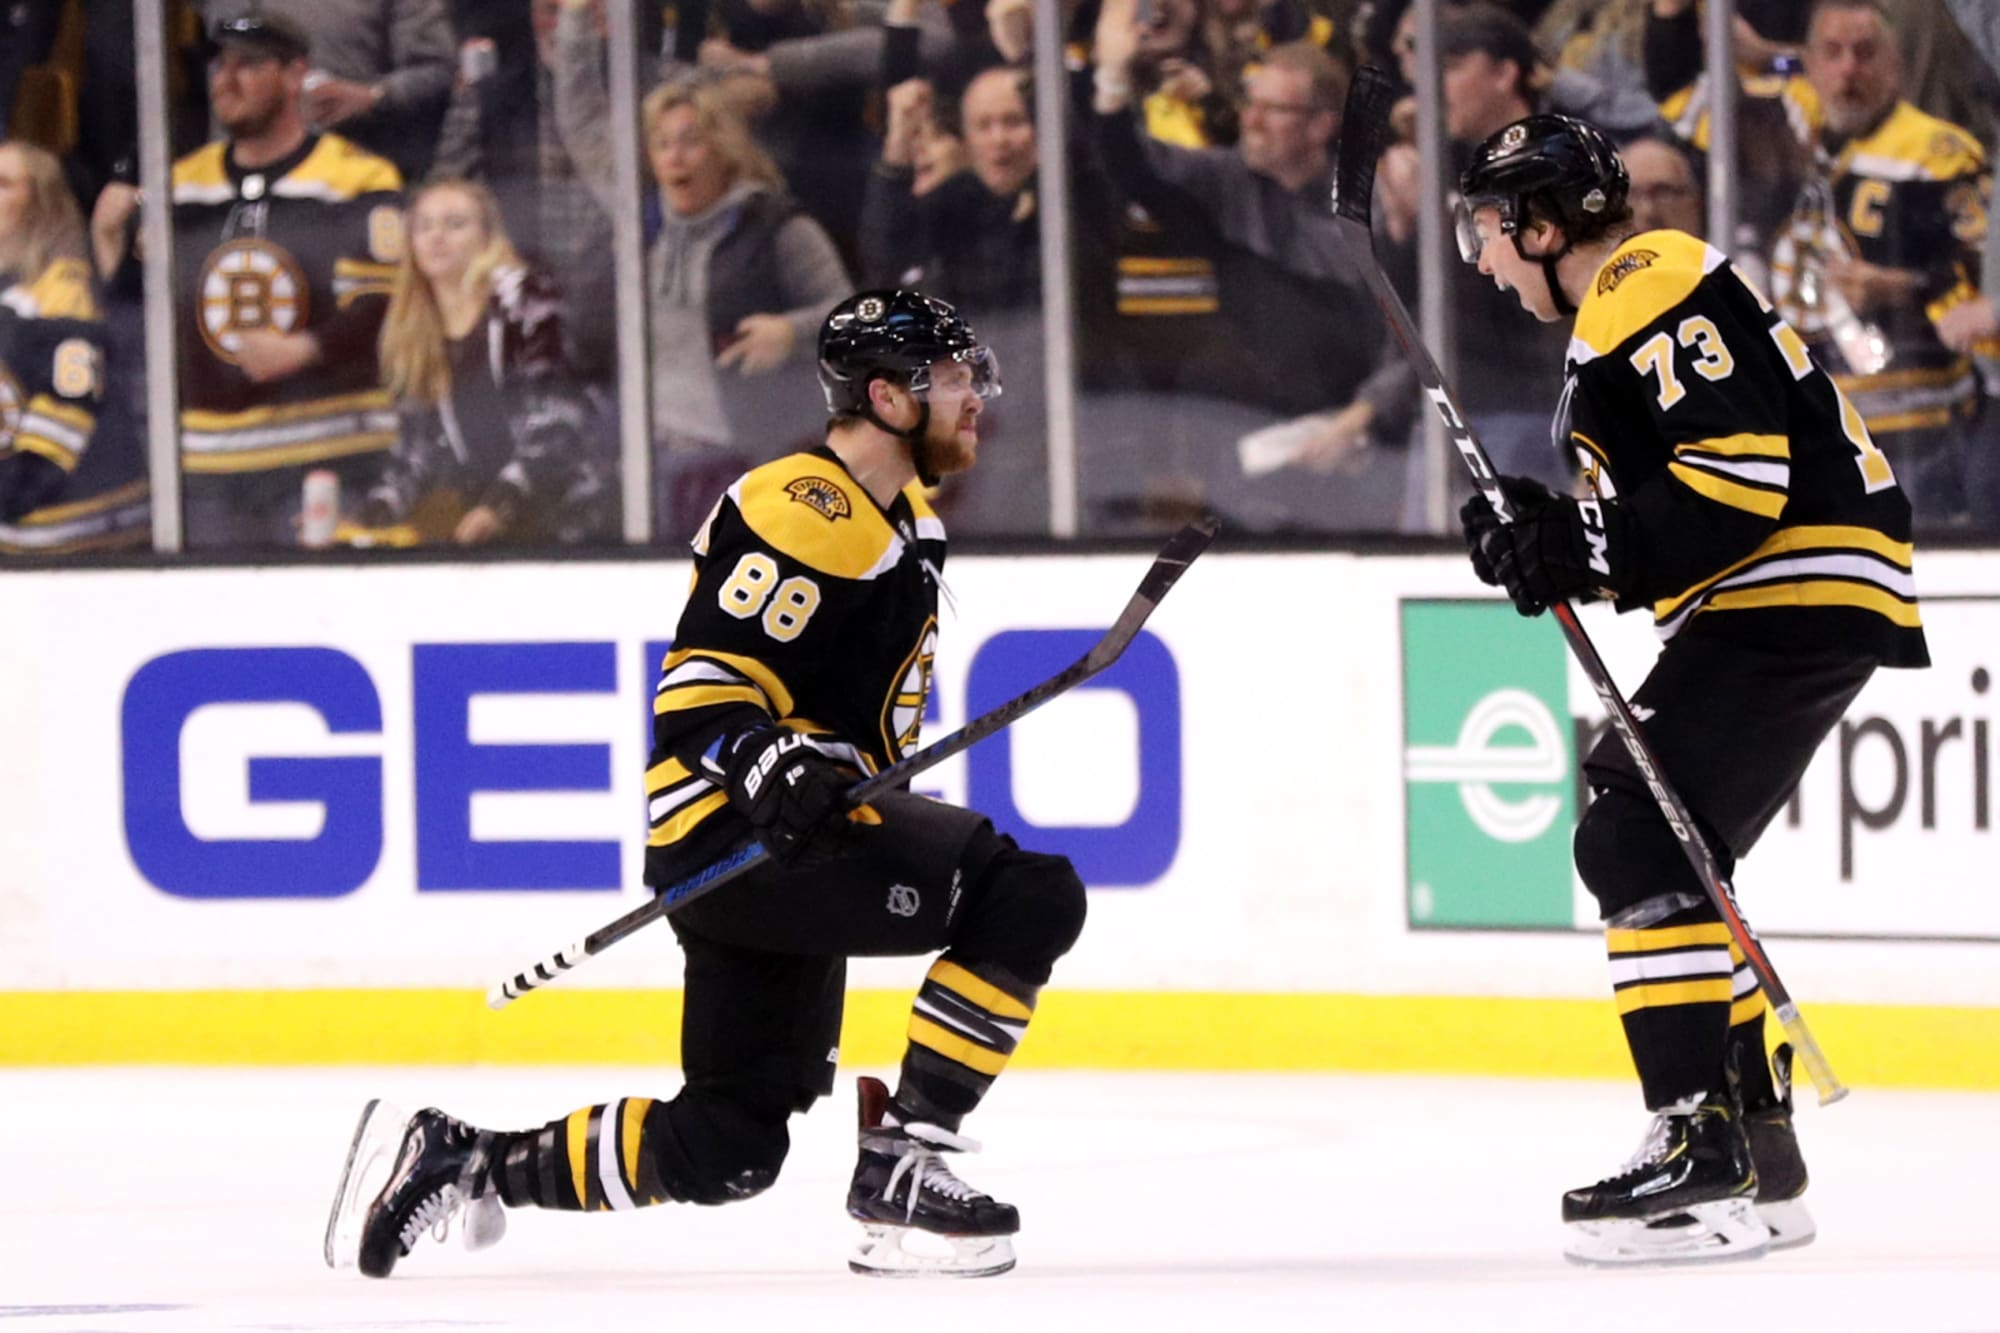 Boston Bruins B's dominate Maple Leafs in game 1 victory